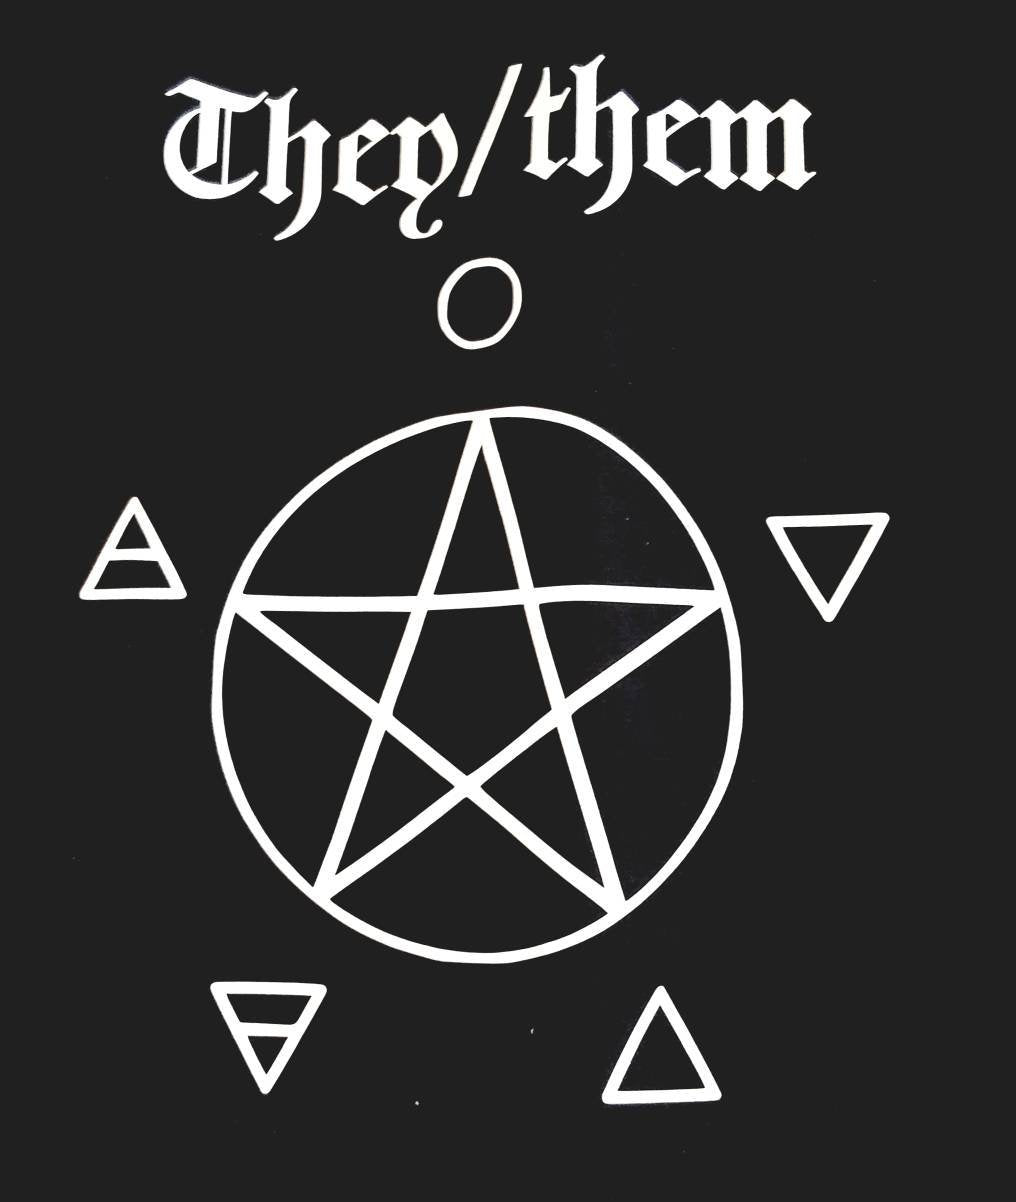 wicca,nonbinary,gender,occult,gothic,non-binary,pentagram,pentacle,elements,goth,satanic,they_them,pronoun